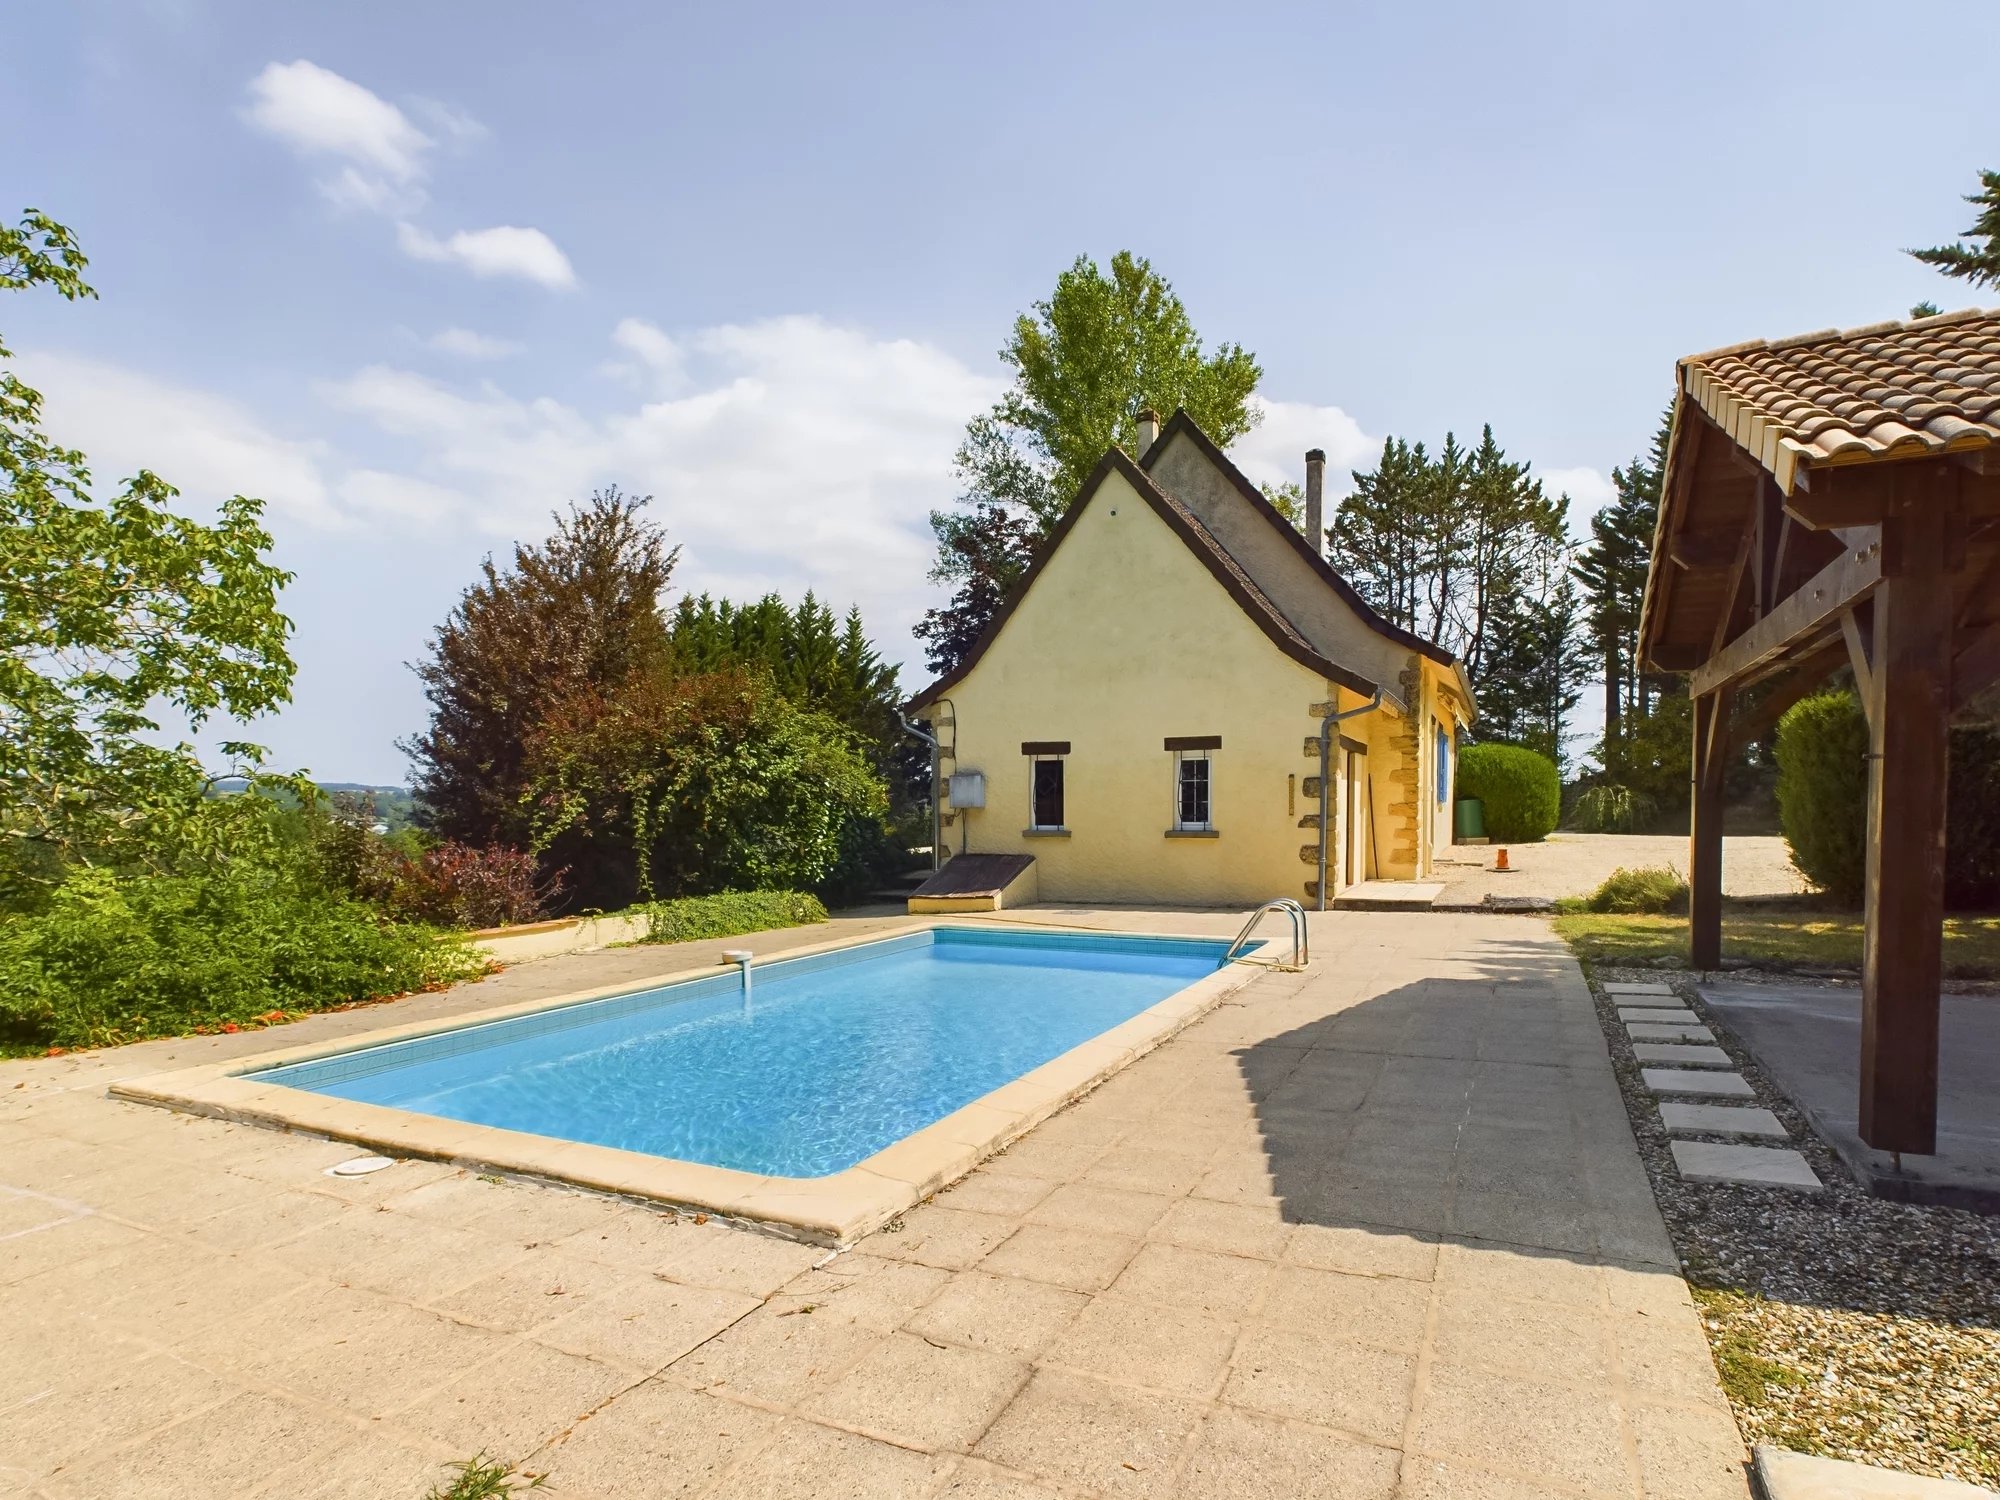 3 Bed house with pool, 3km from central Eymet